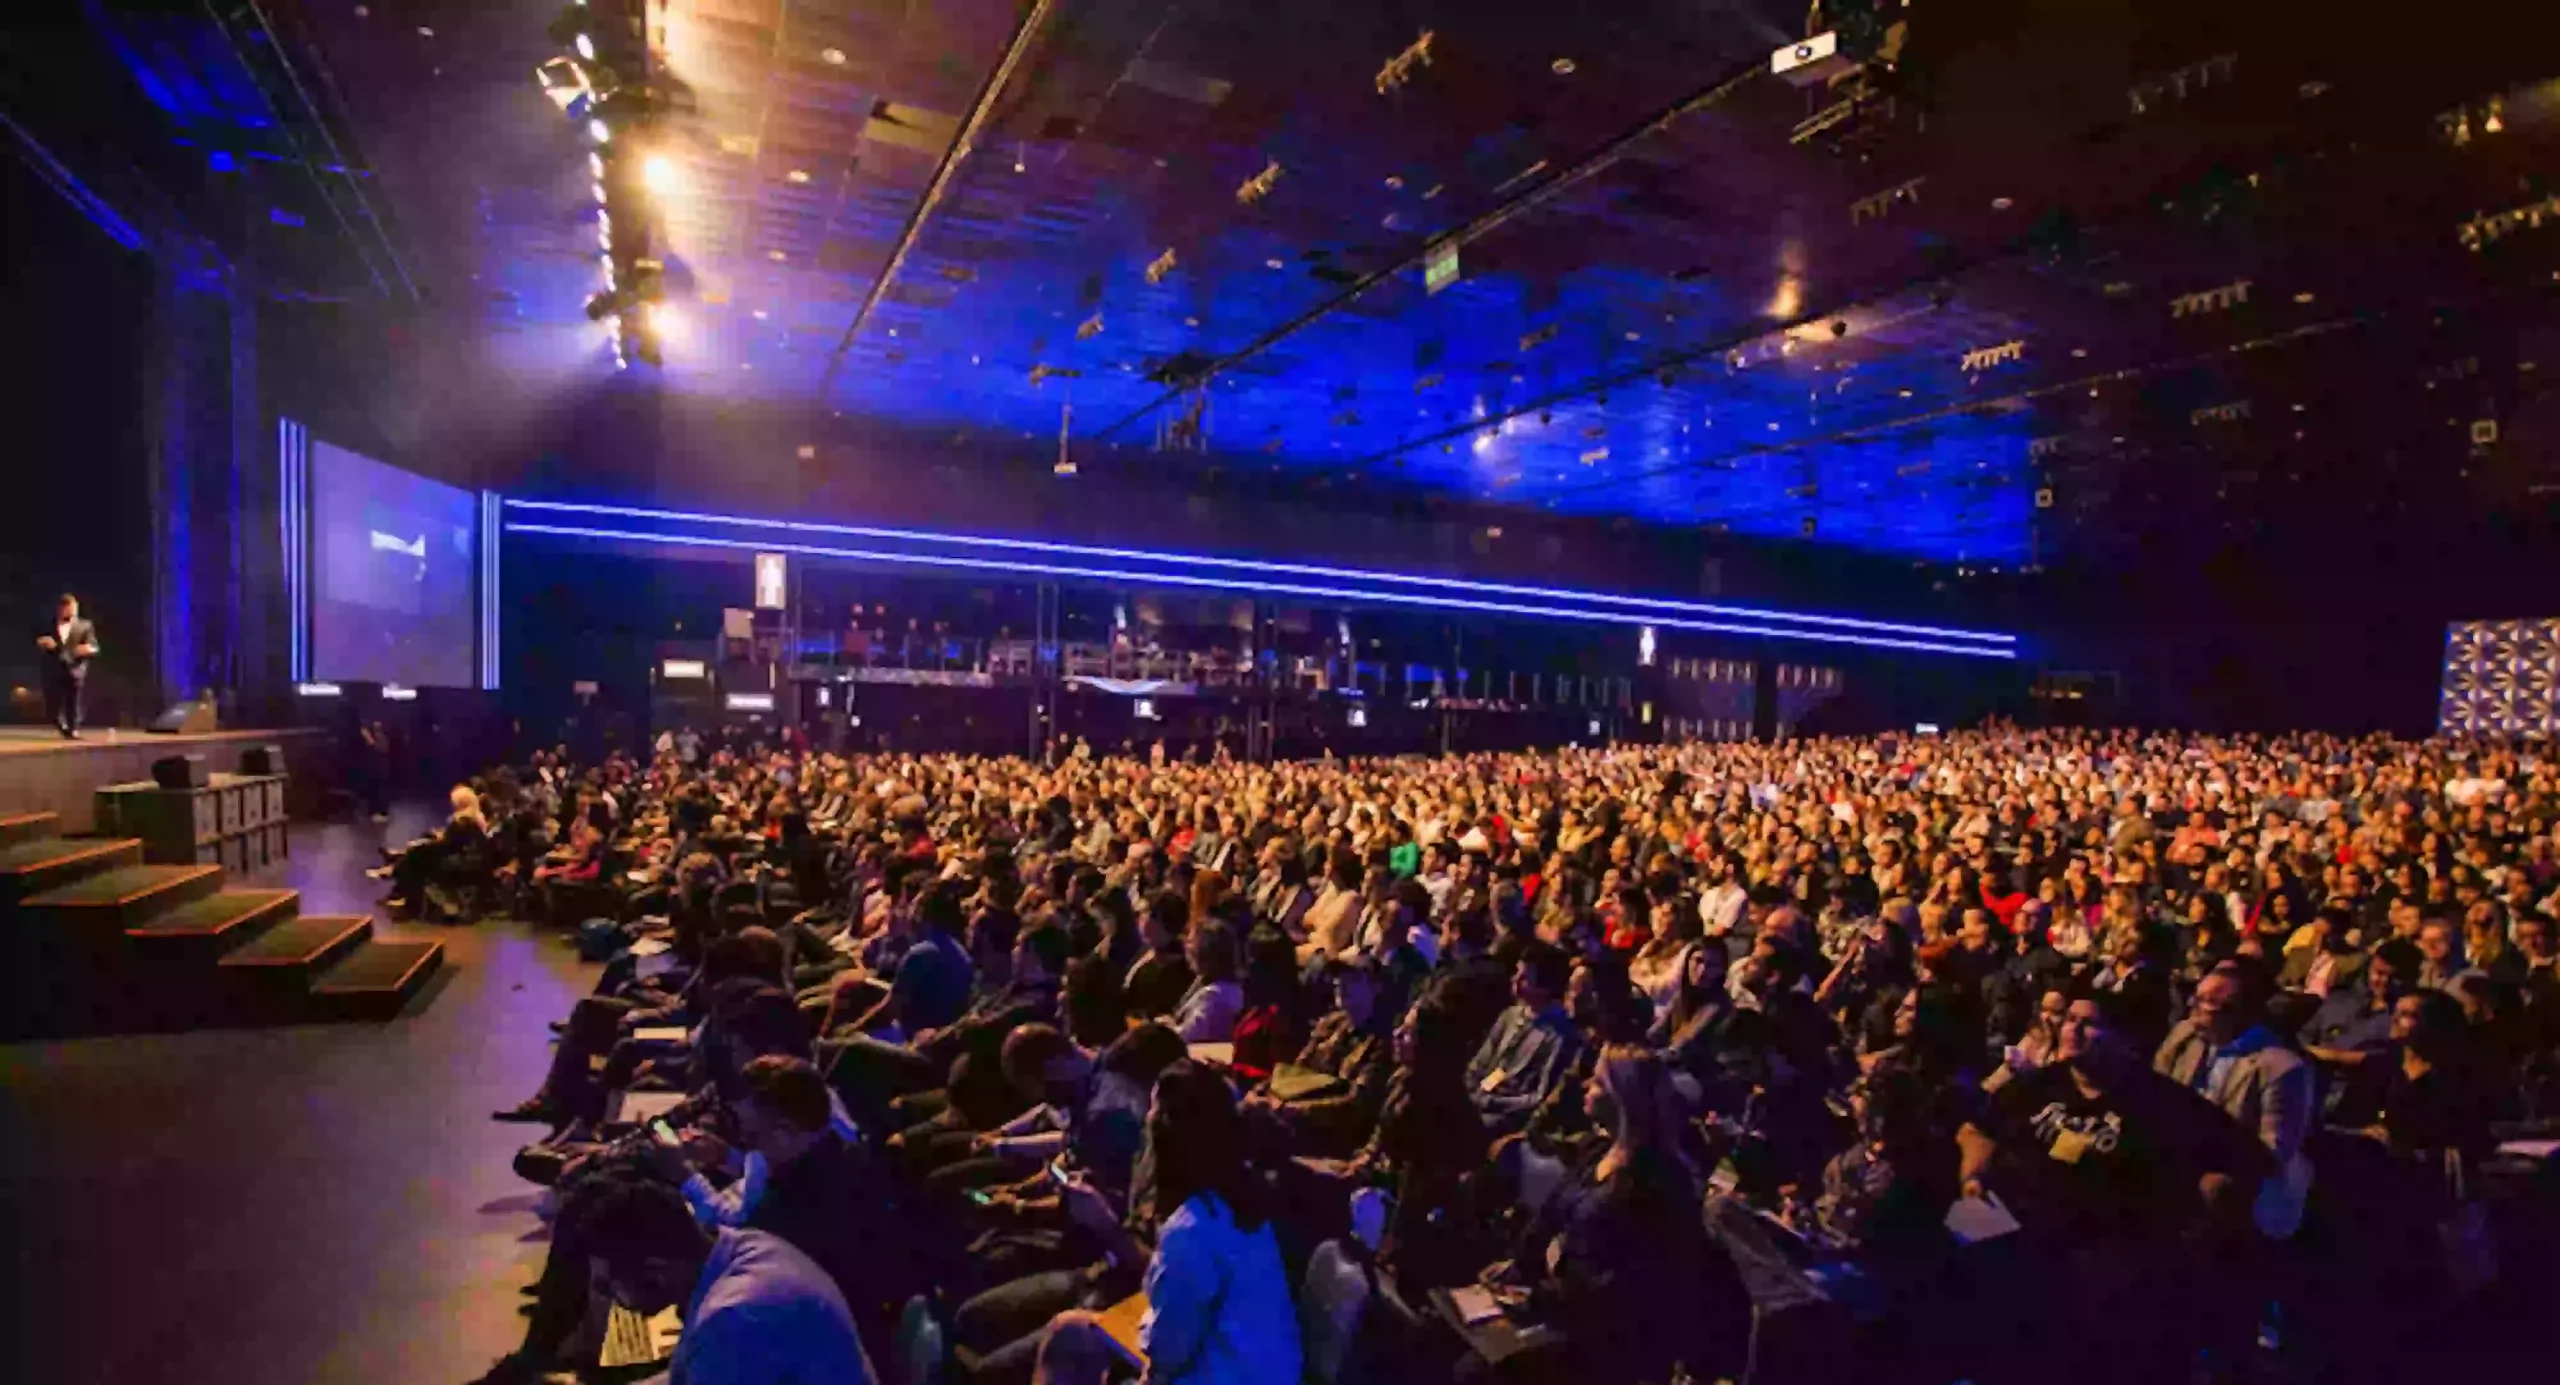 A crowd of people at a large conference venue are bathed in blue light.